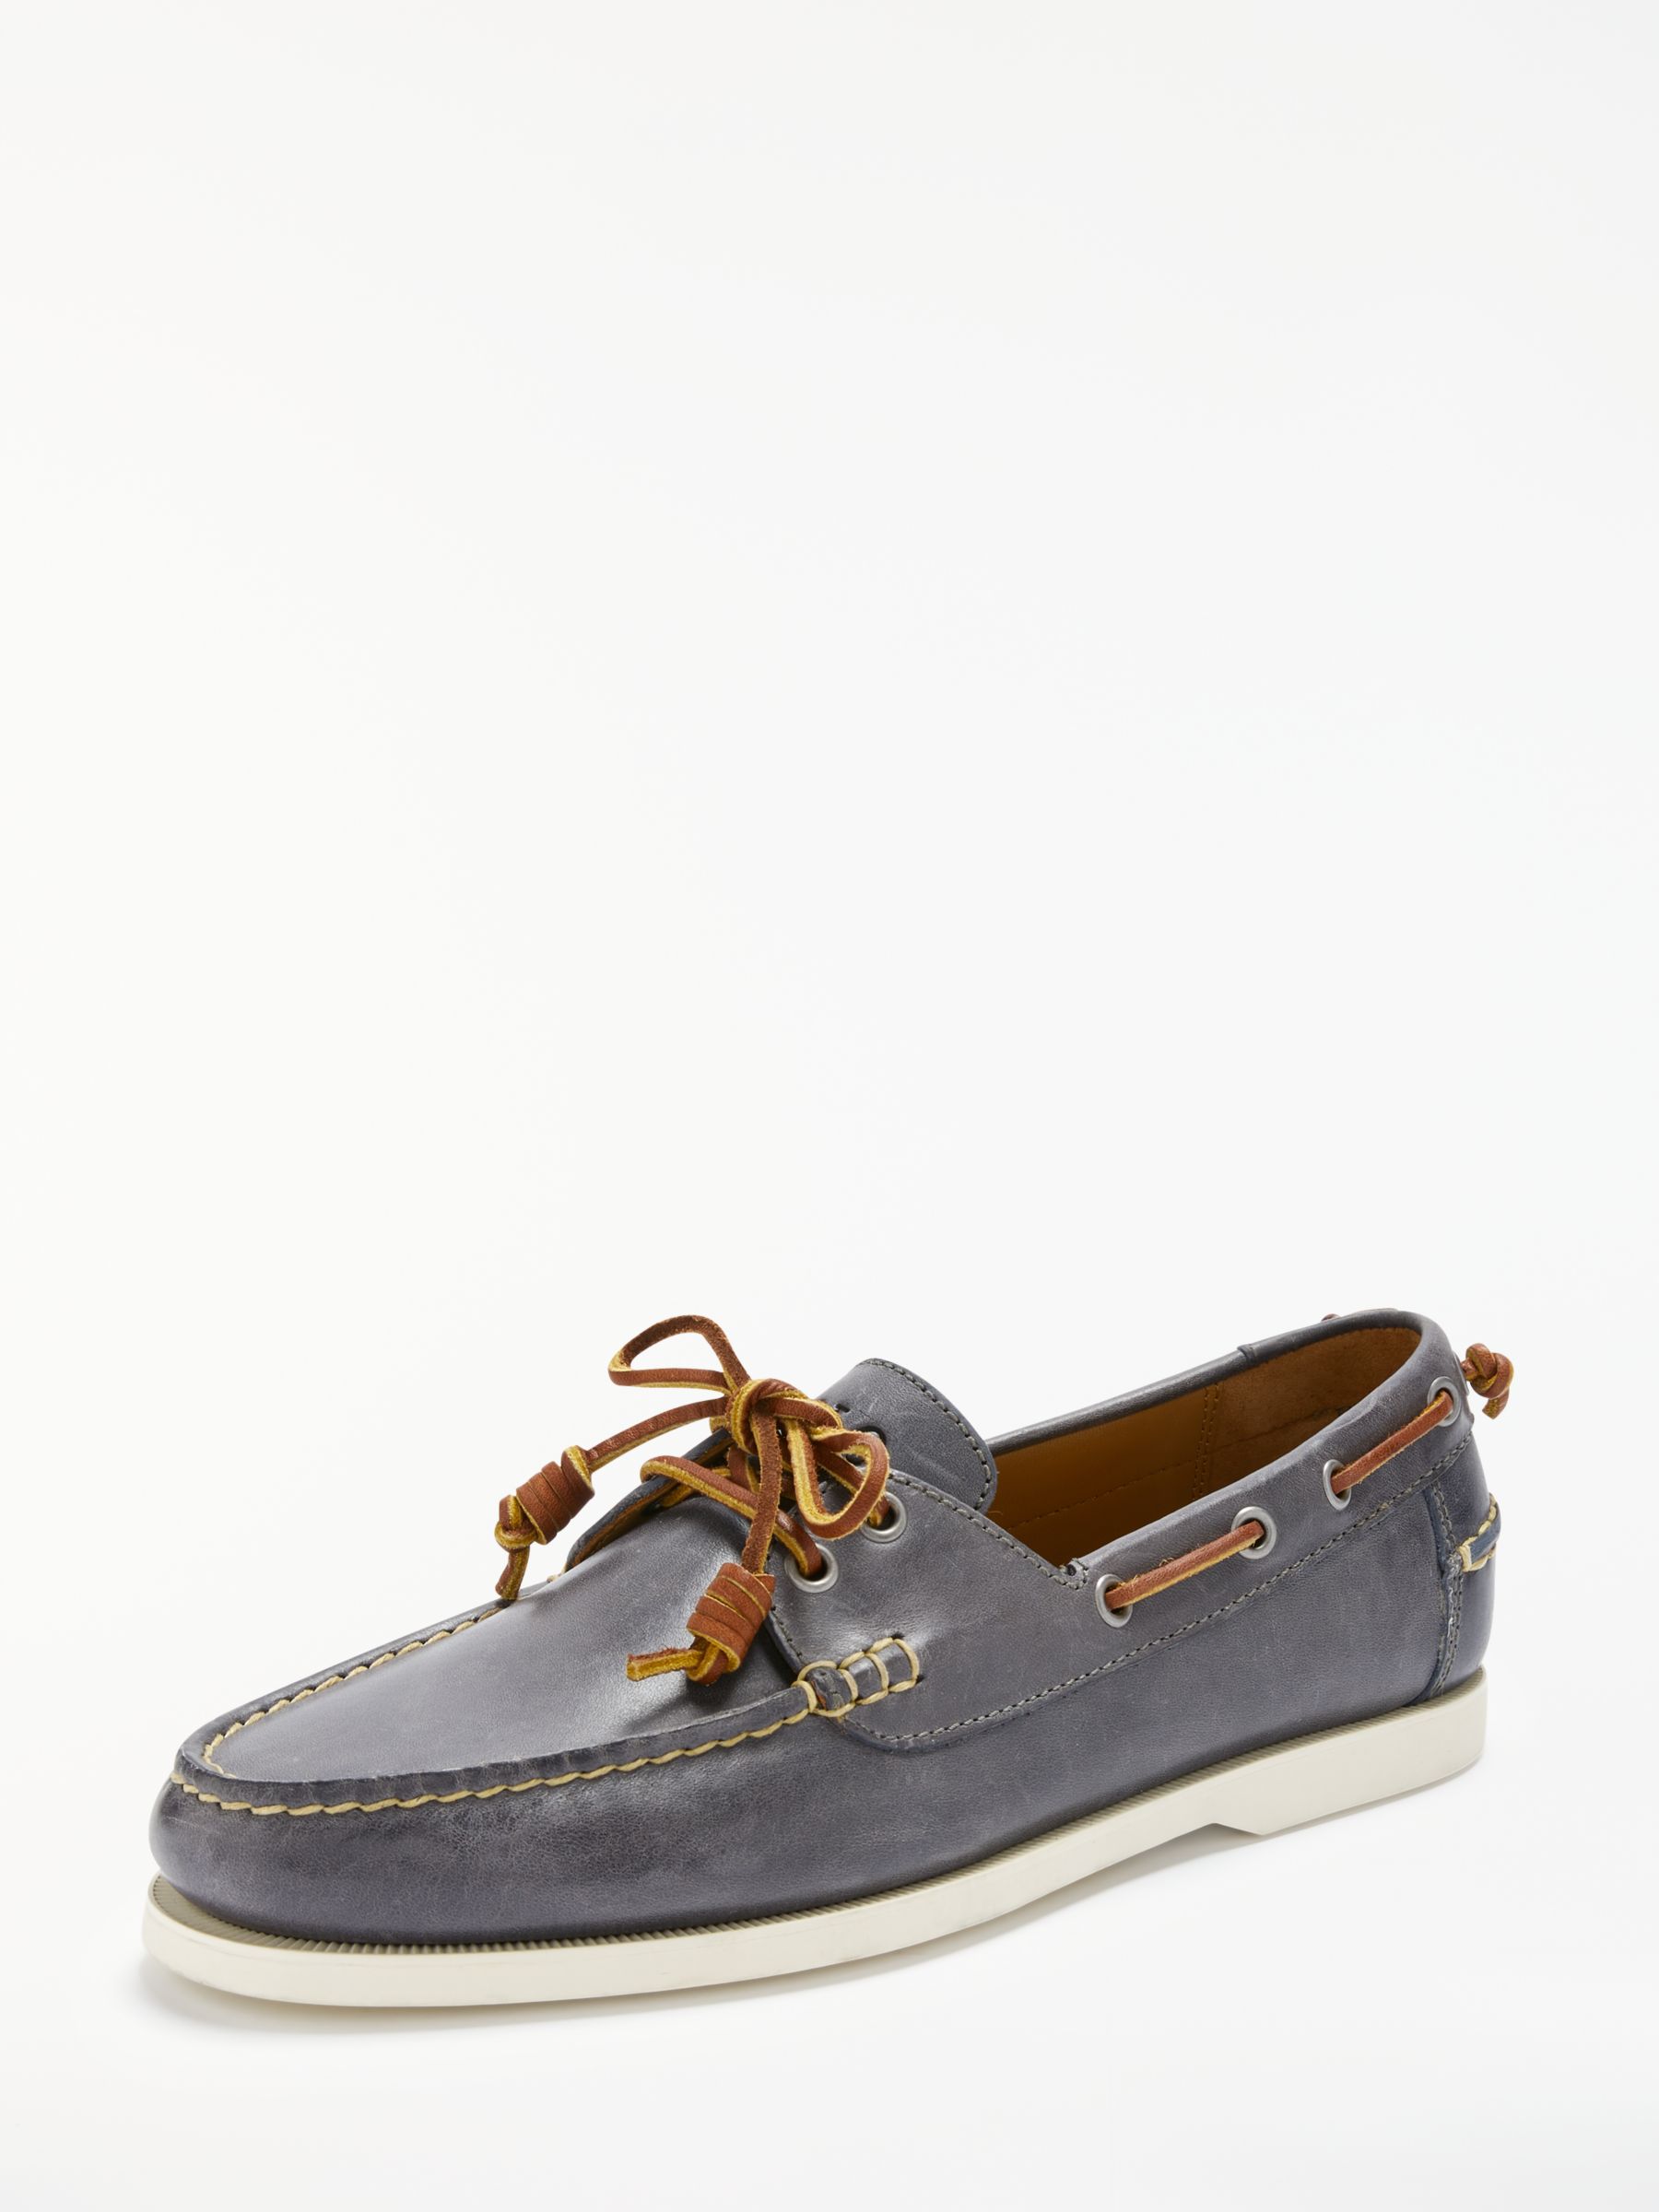 polo boat shoes